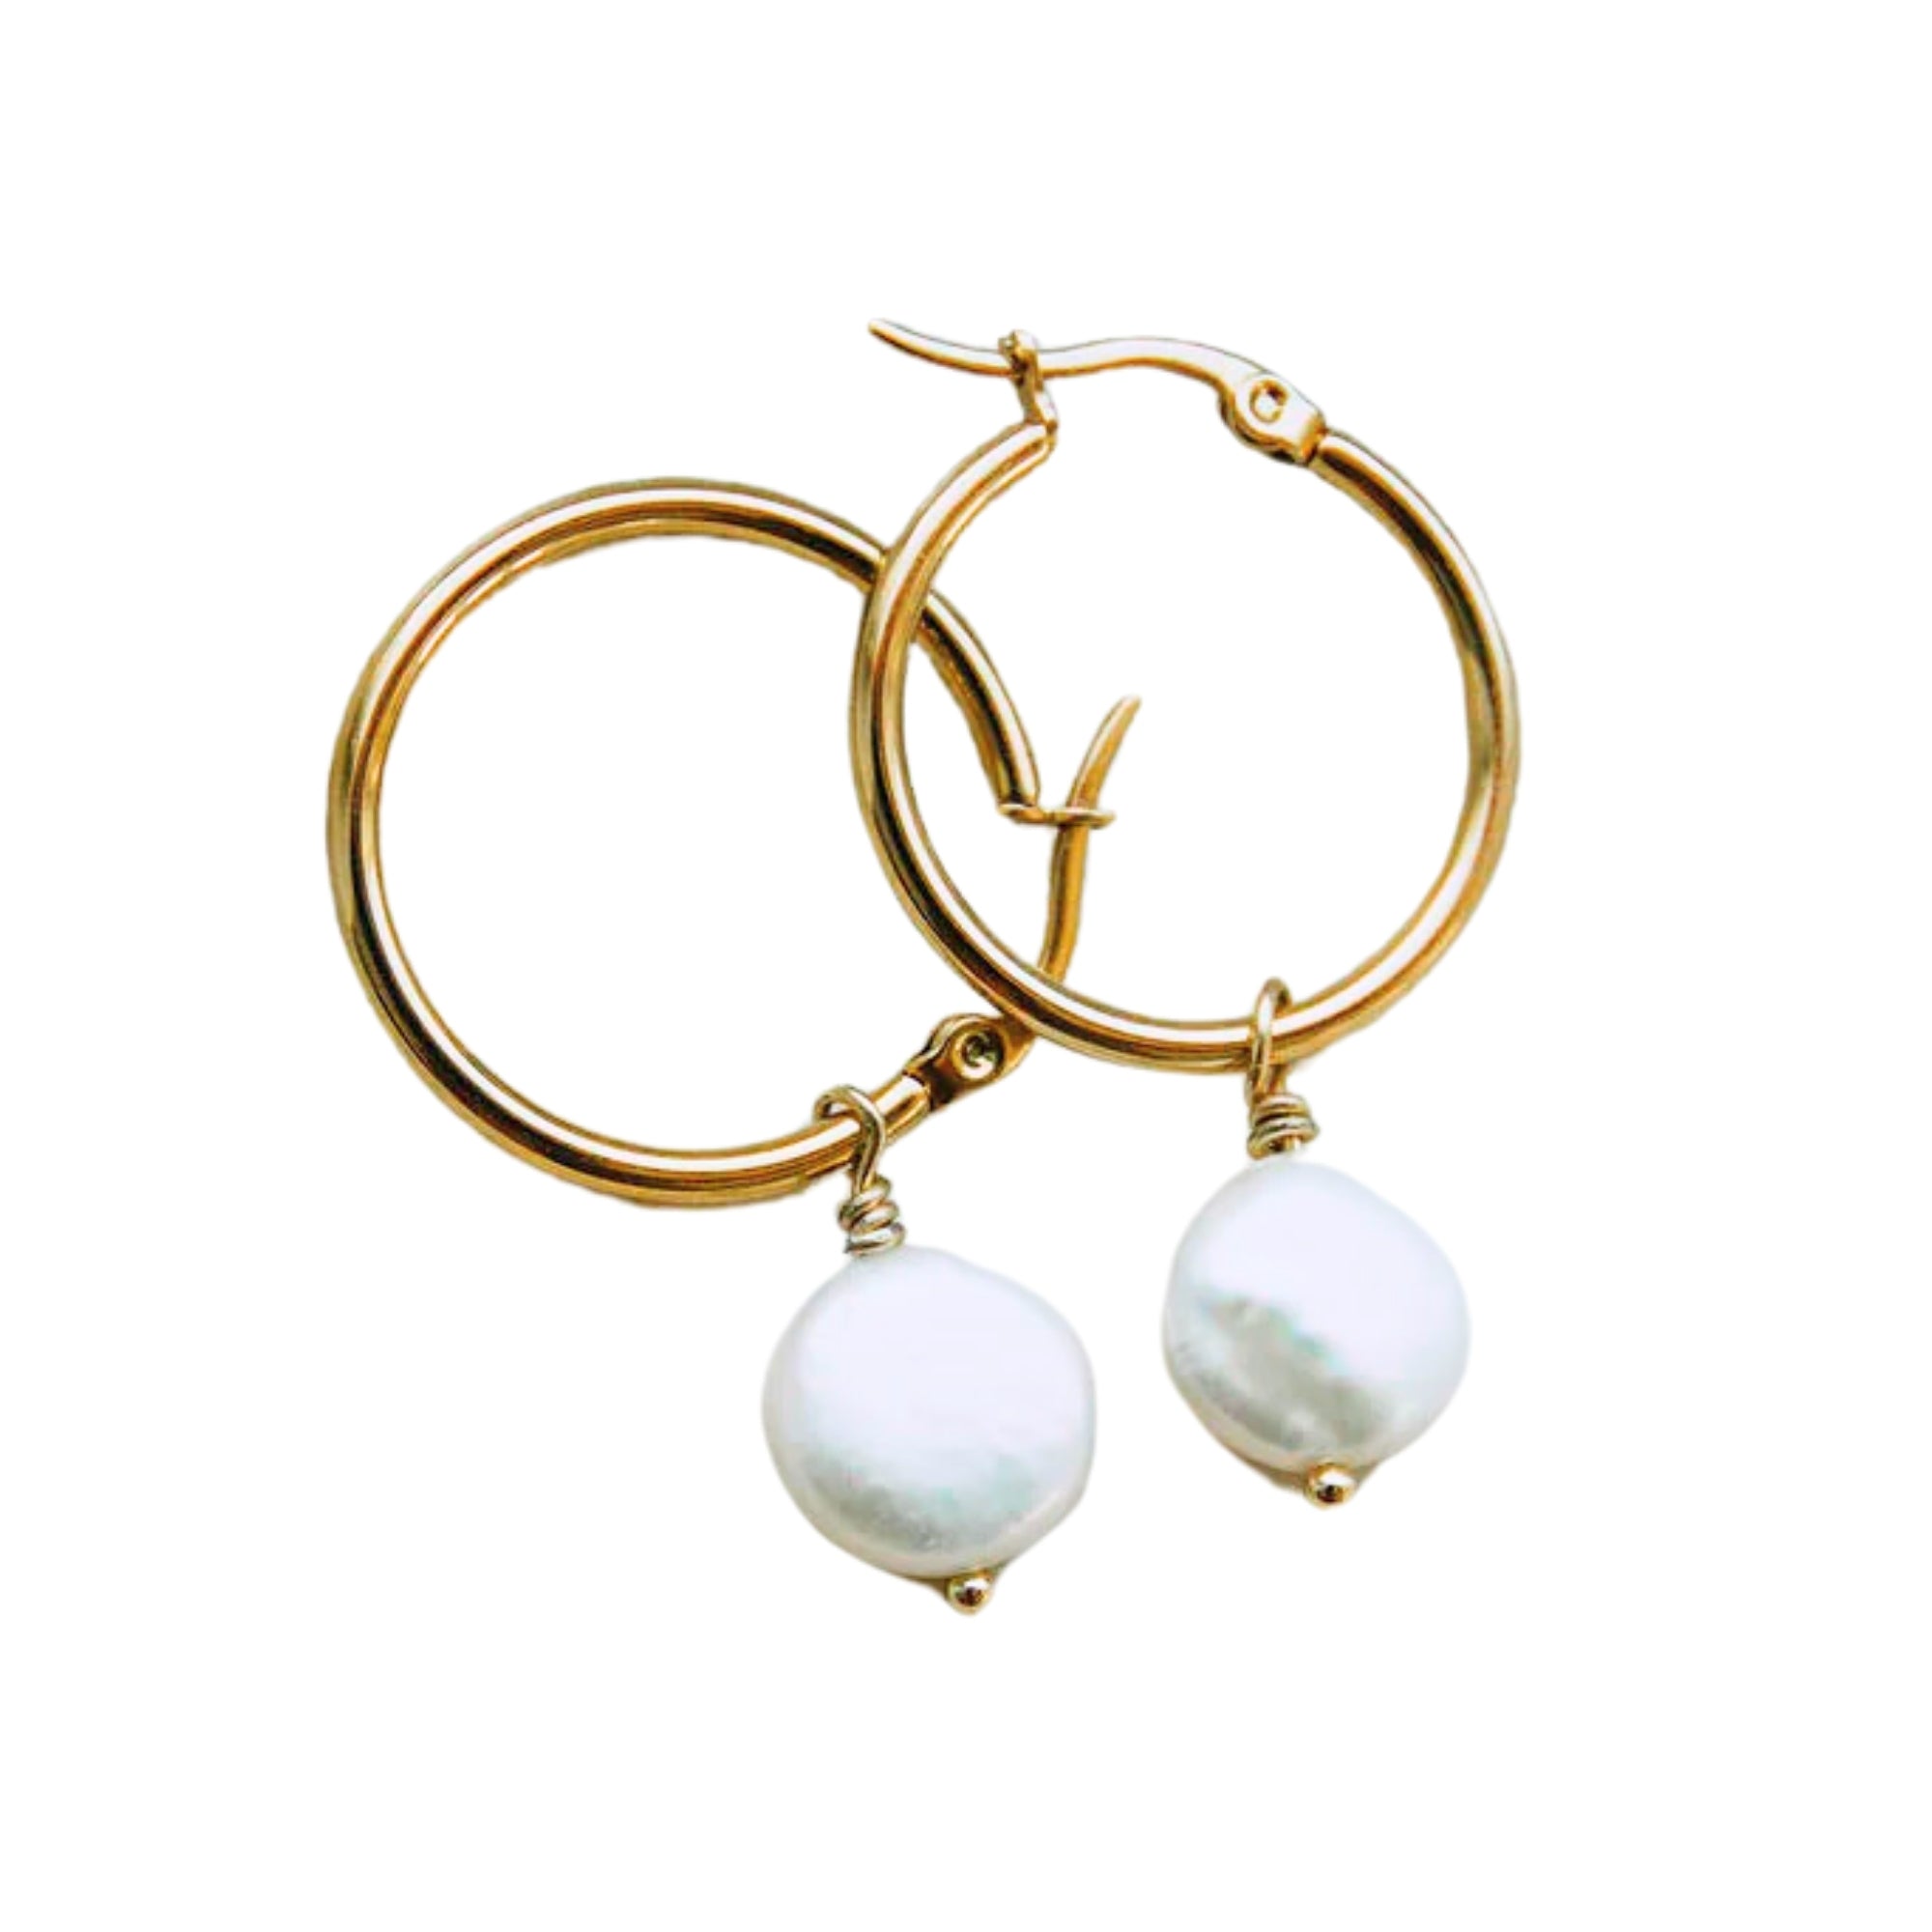 The Odette Hoop Earrings by Kathrina Ong • Likhaan